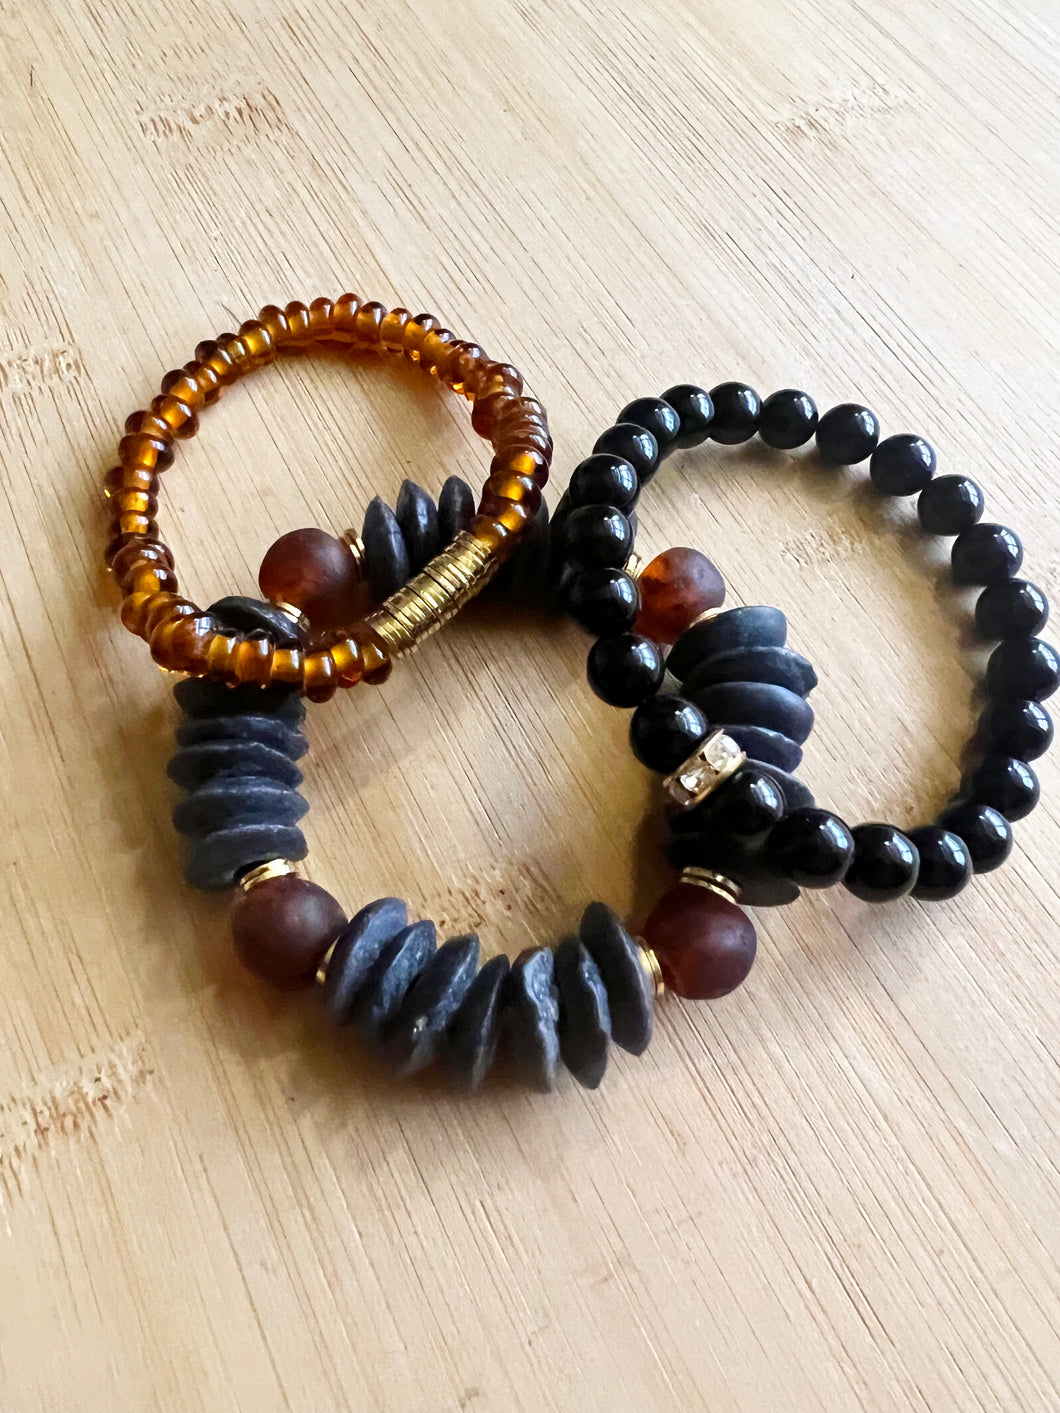 The edgy combo of black and amber creates a unique and gorgeous stack.  Features a black ashanti glass bracelet with with recycled glass beads, an amber glass bracelet with brushed gold accents and an onyx bracelet with small gold and crystal accent bead  All bracelets measure 7 inches but can be customized upon request